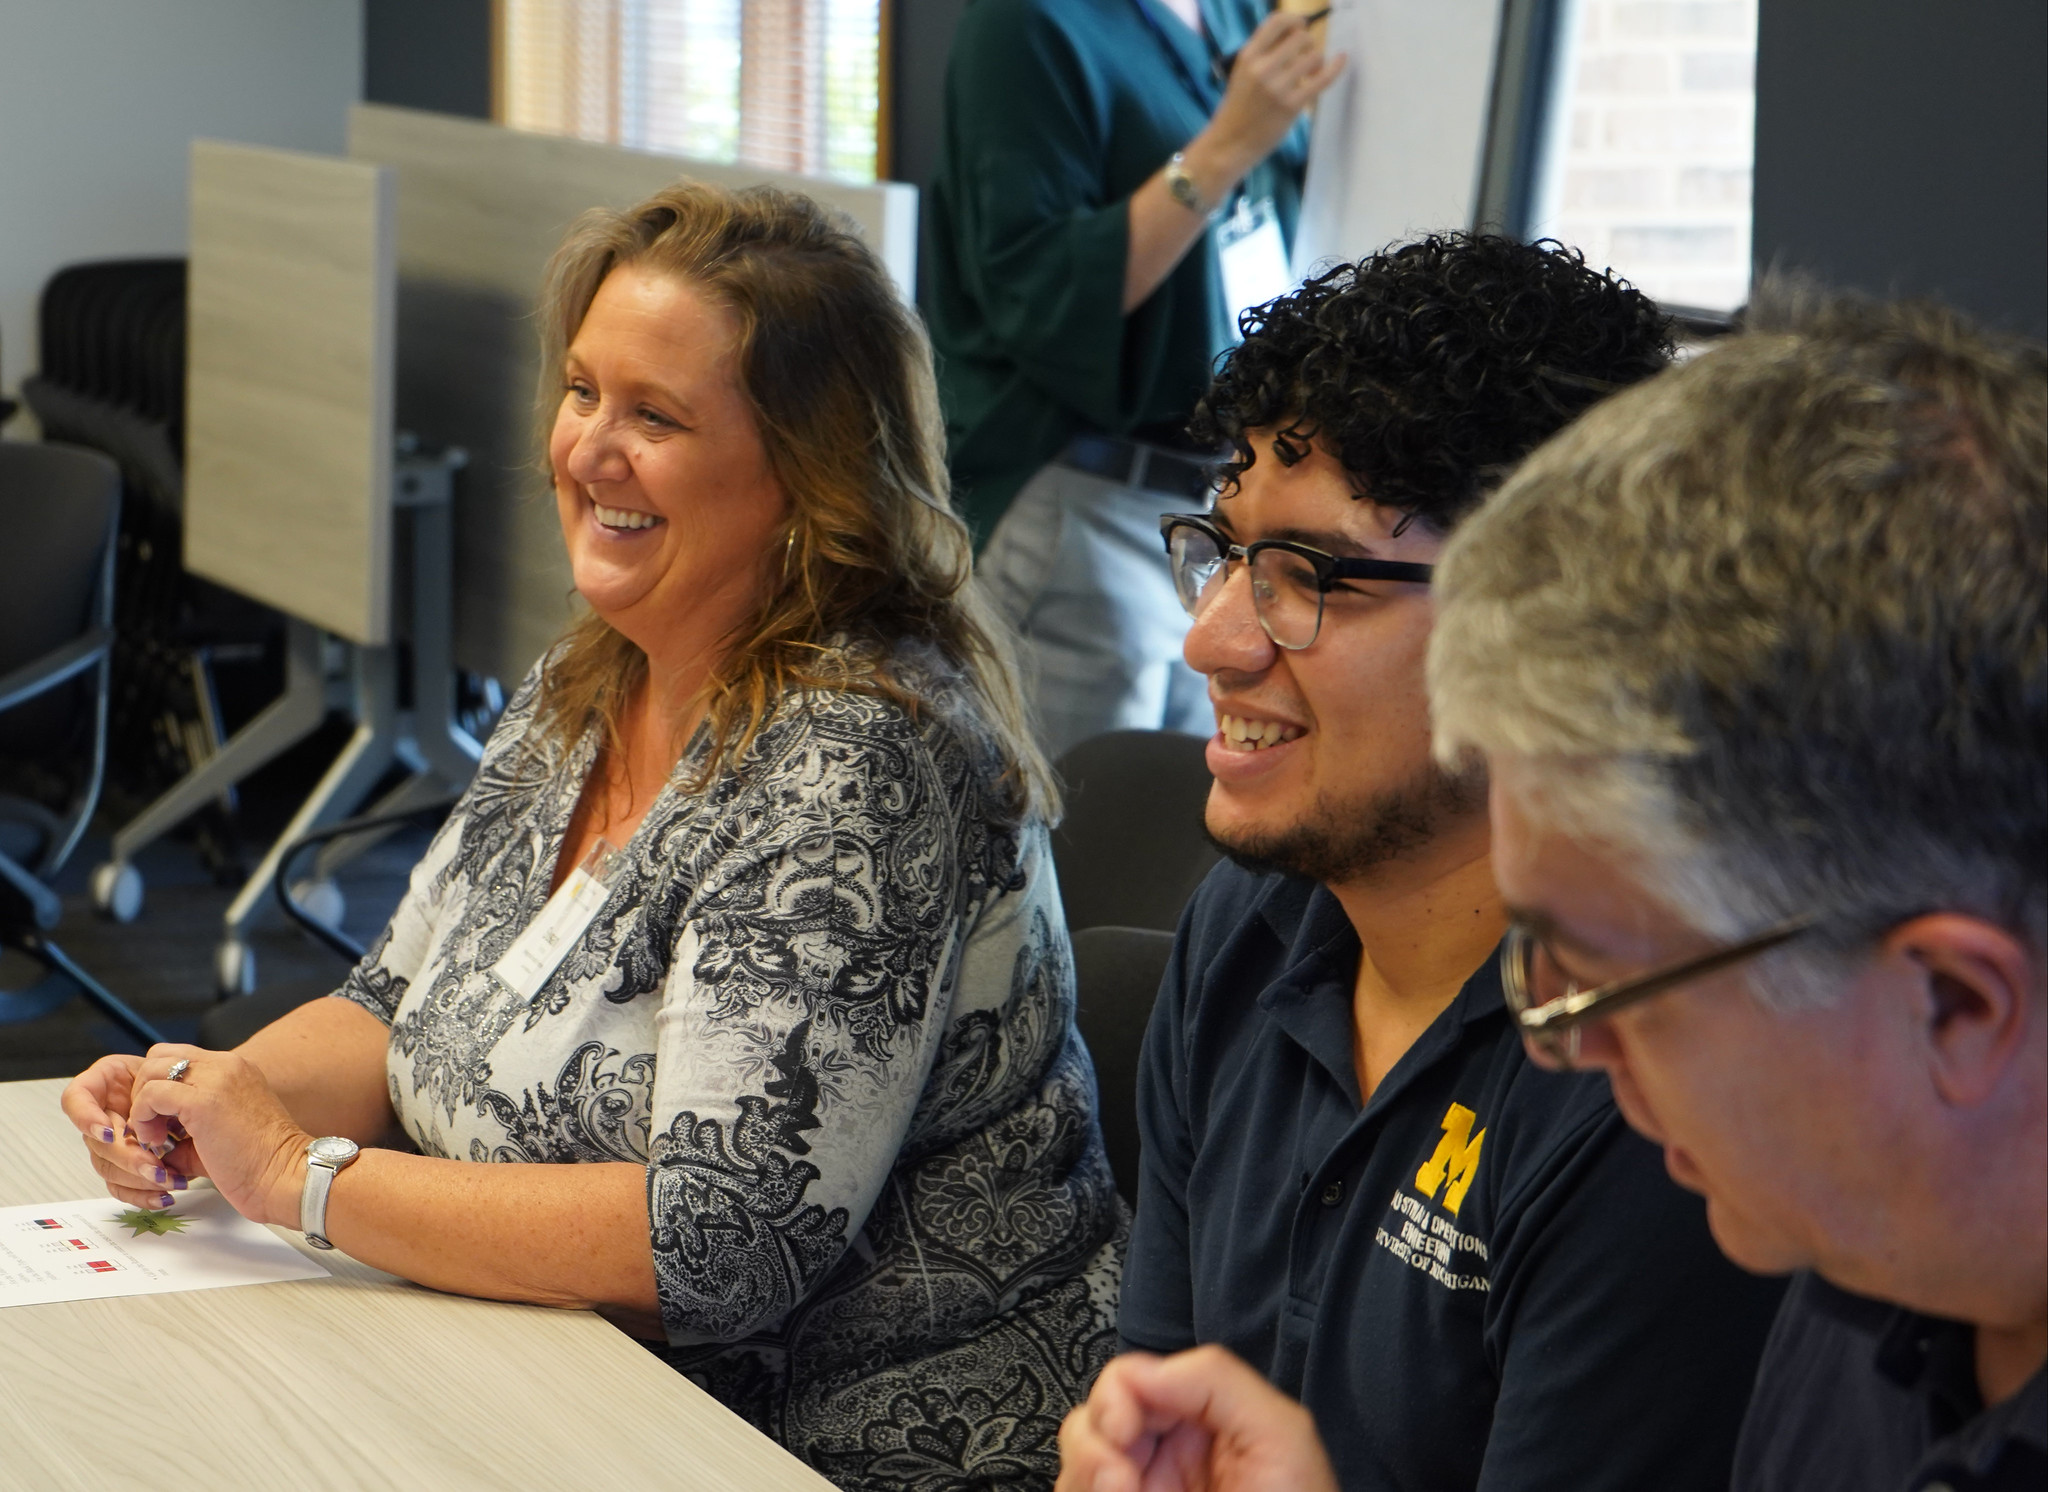 5 Reasons to Earn a Certificate from the University of Michigan